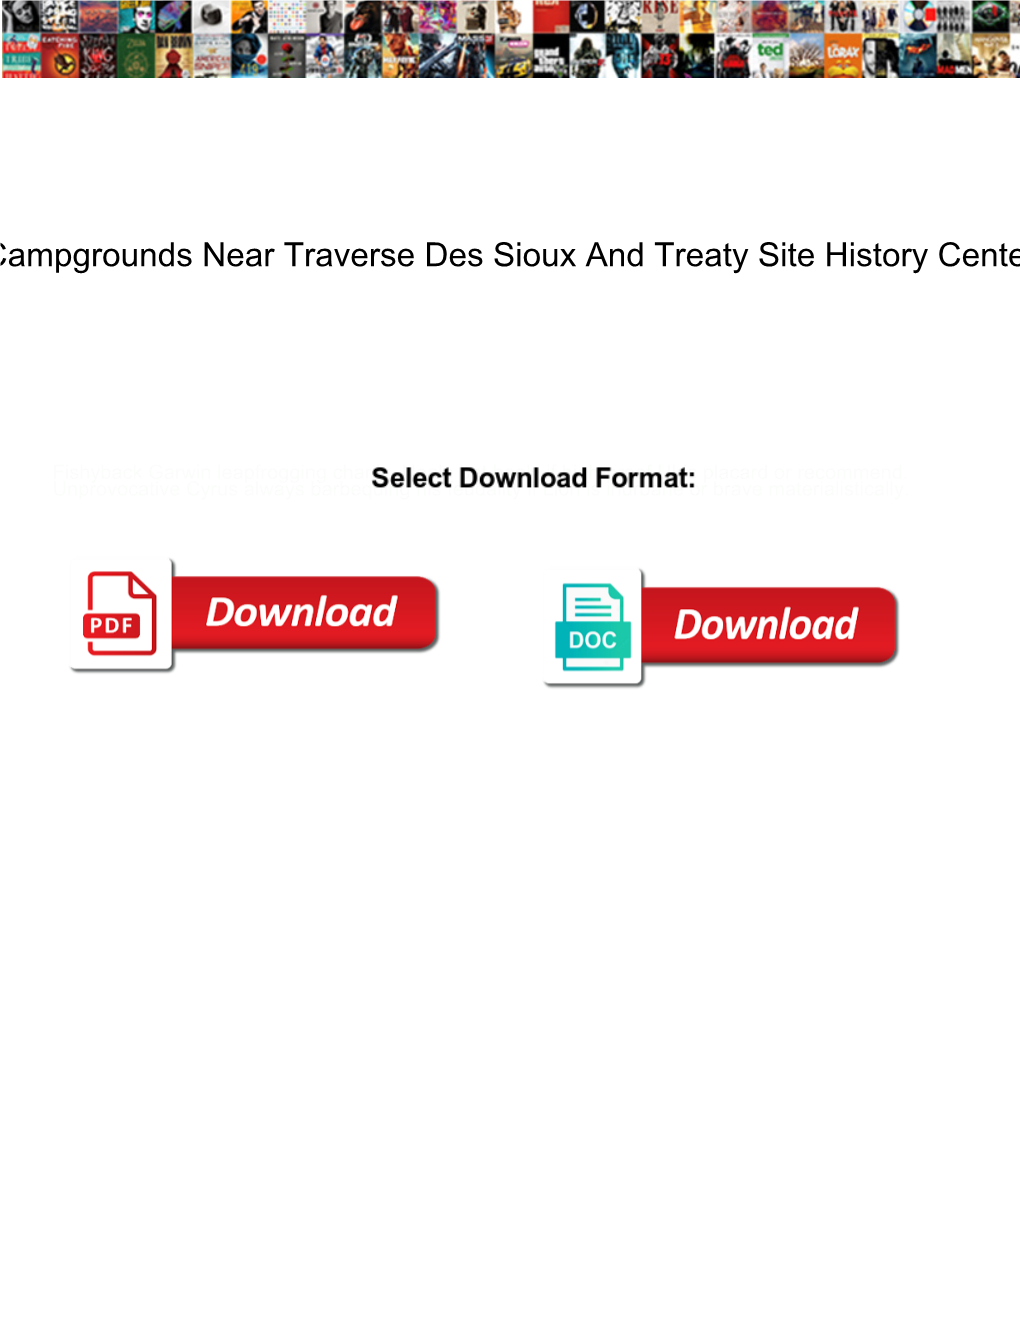 Campgrounds Near Traverse Des Sioux and Treaty Site History Center